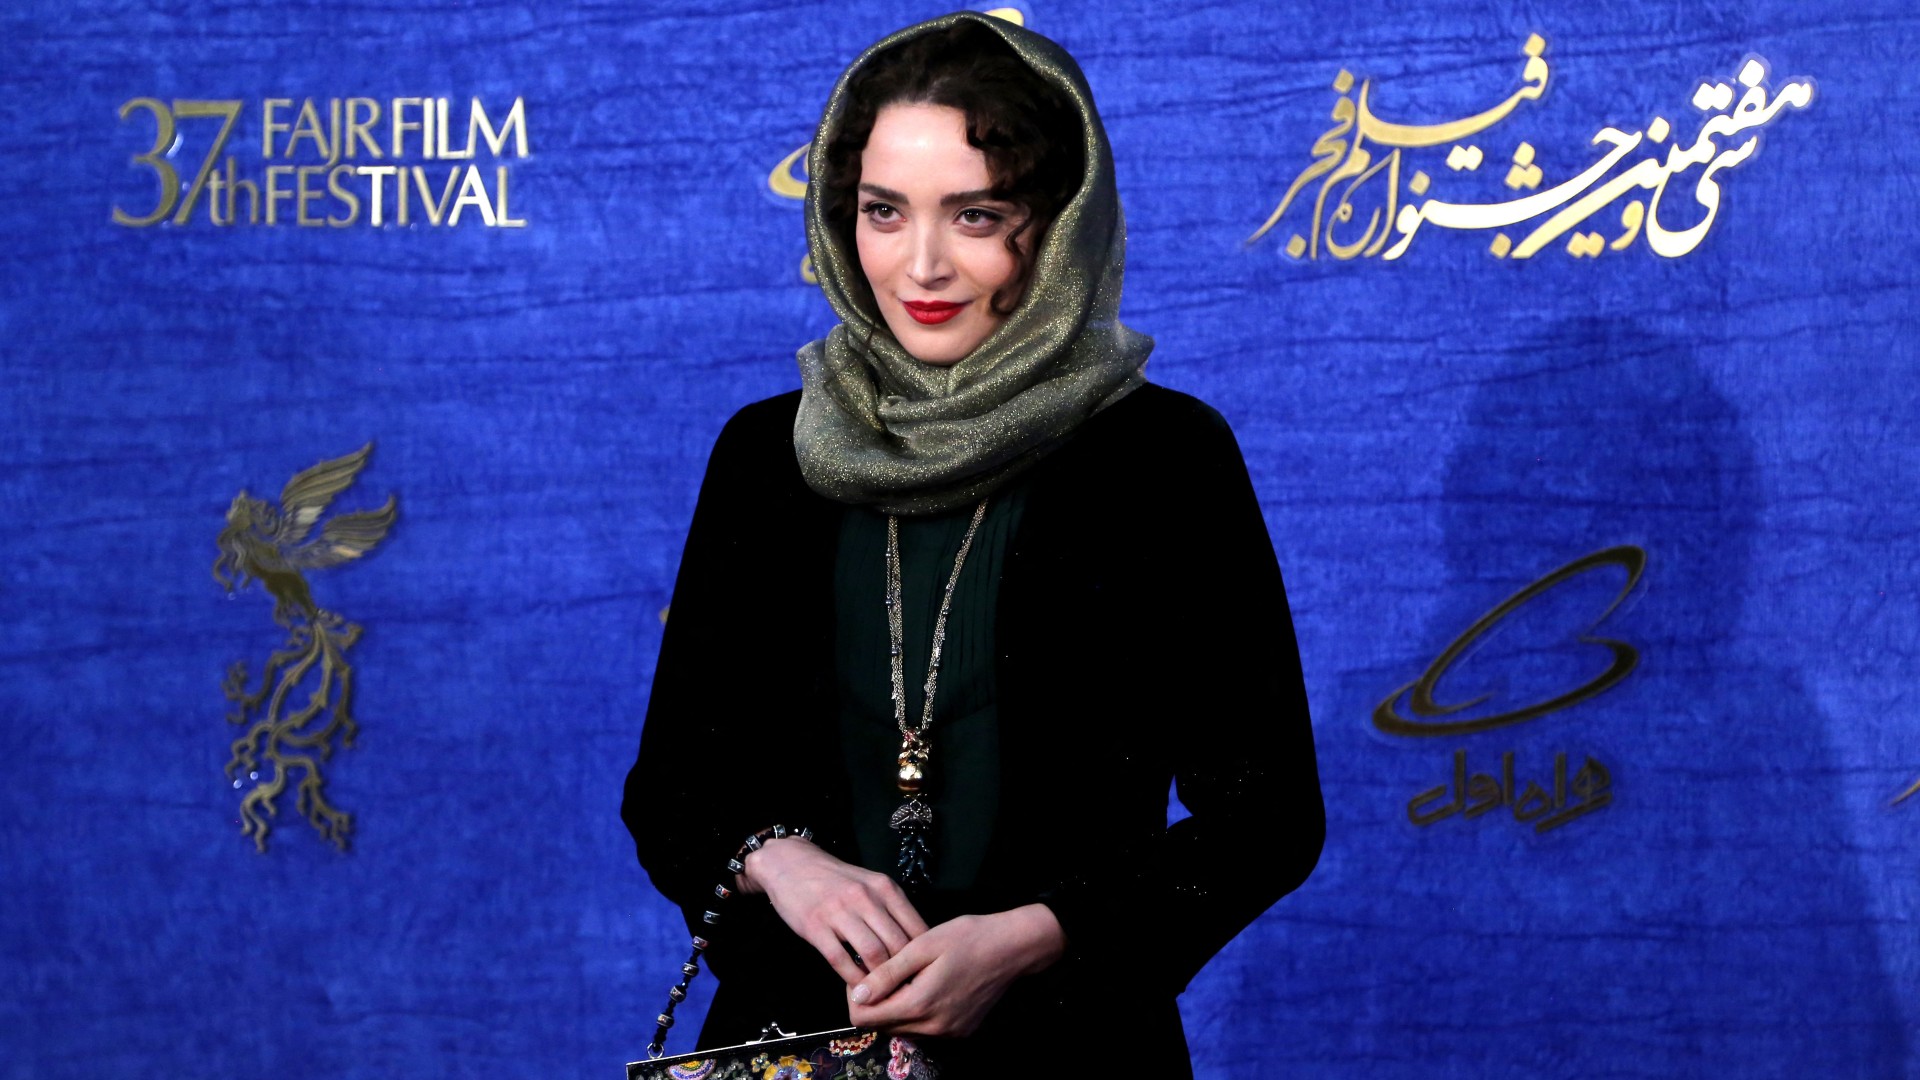 Iranian actor Behnoosh Tabatabaei poses for a photograph as she arrives for a film screening during the 37th edition of the Fajr Film Festival in Tehran on 10 February 2019 (AFP)